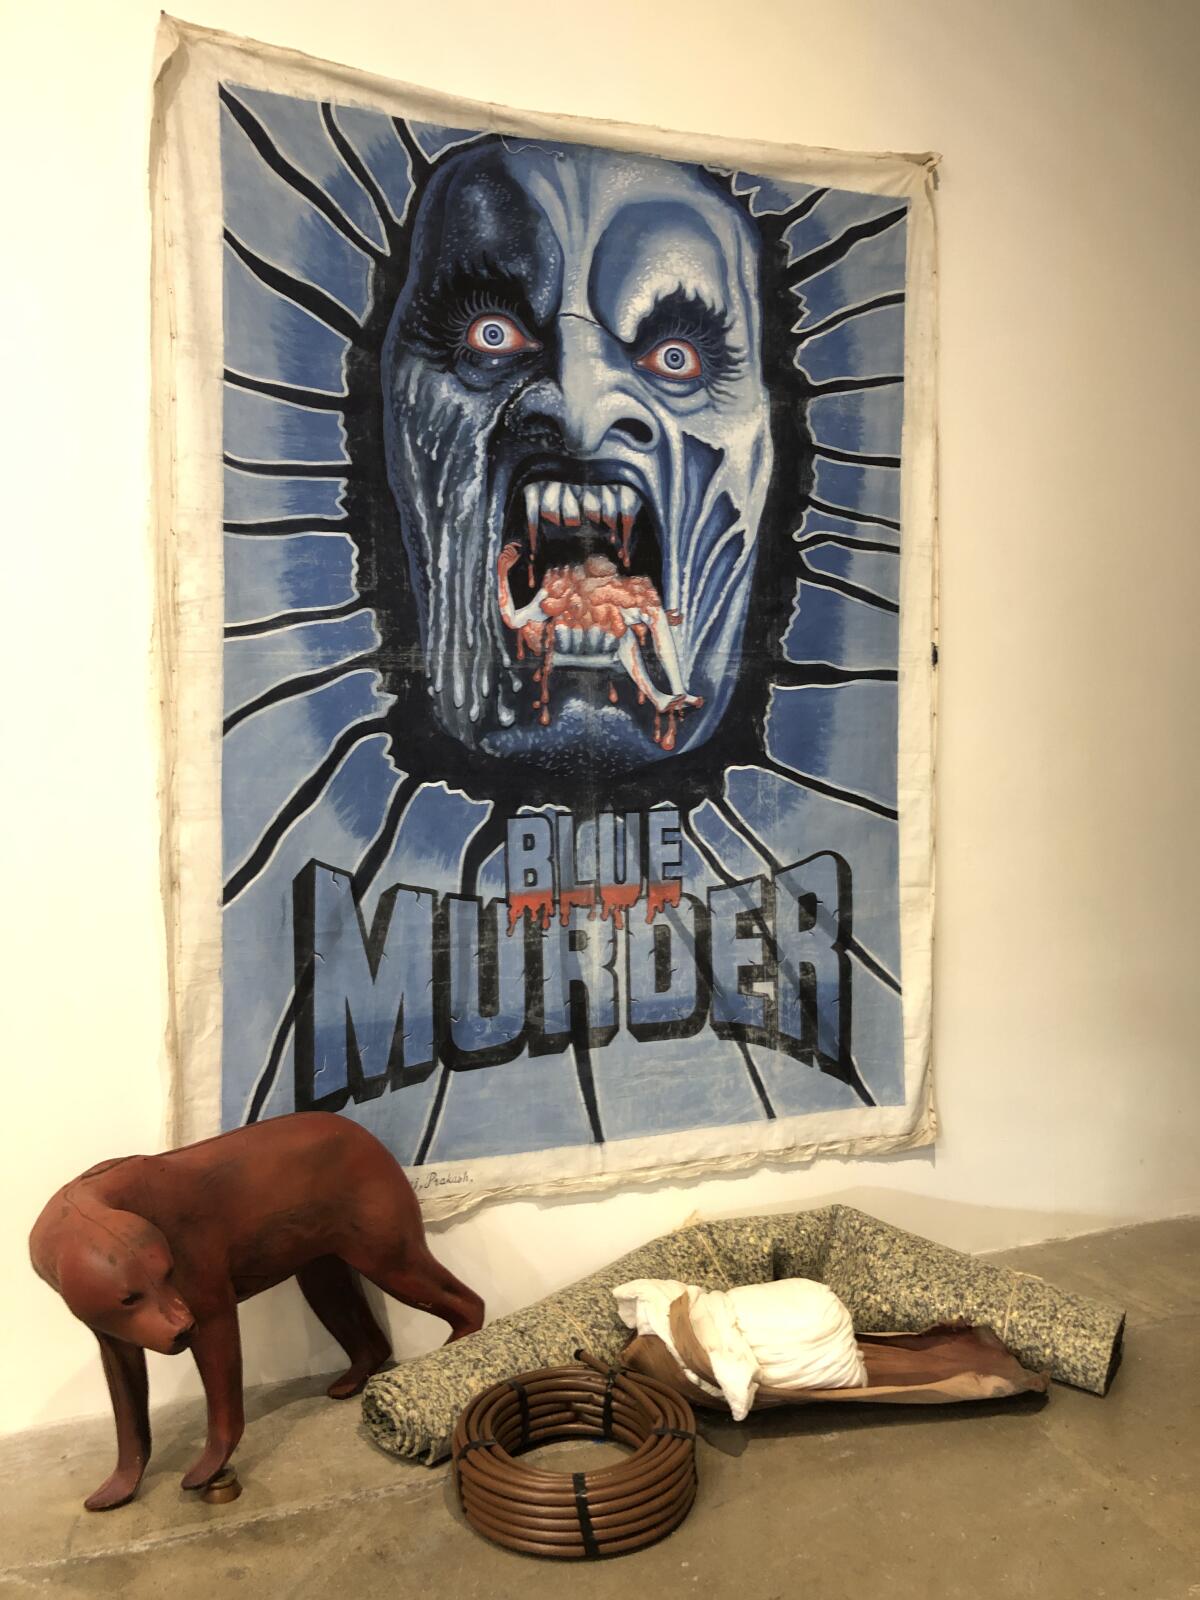 A sculpture of an animal and other objects sit before a billboard for "Blue Murder" showing a figure with vampiric teeth